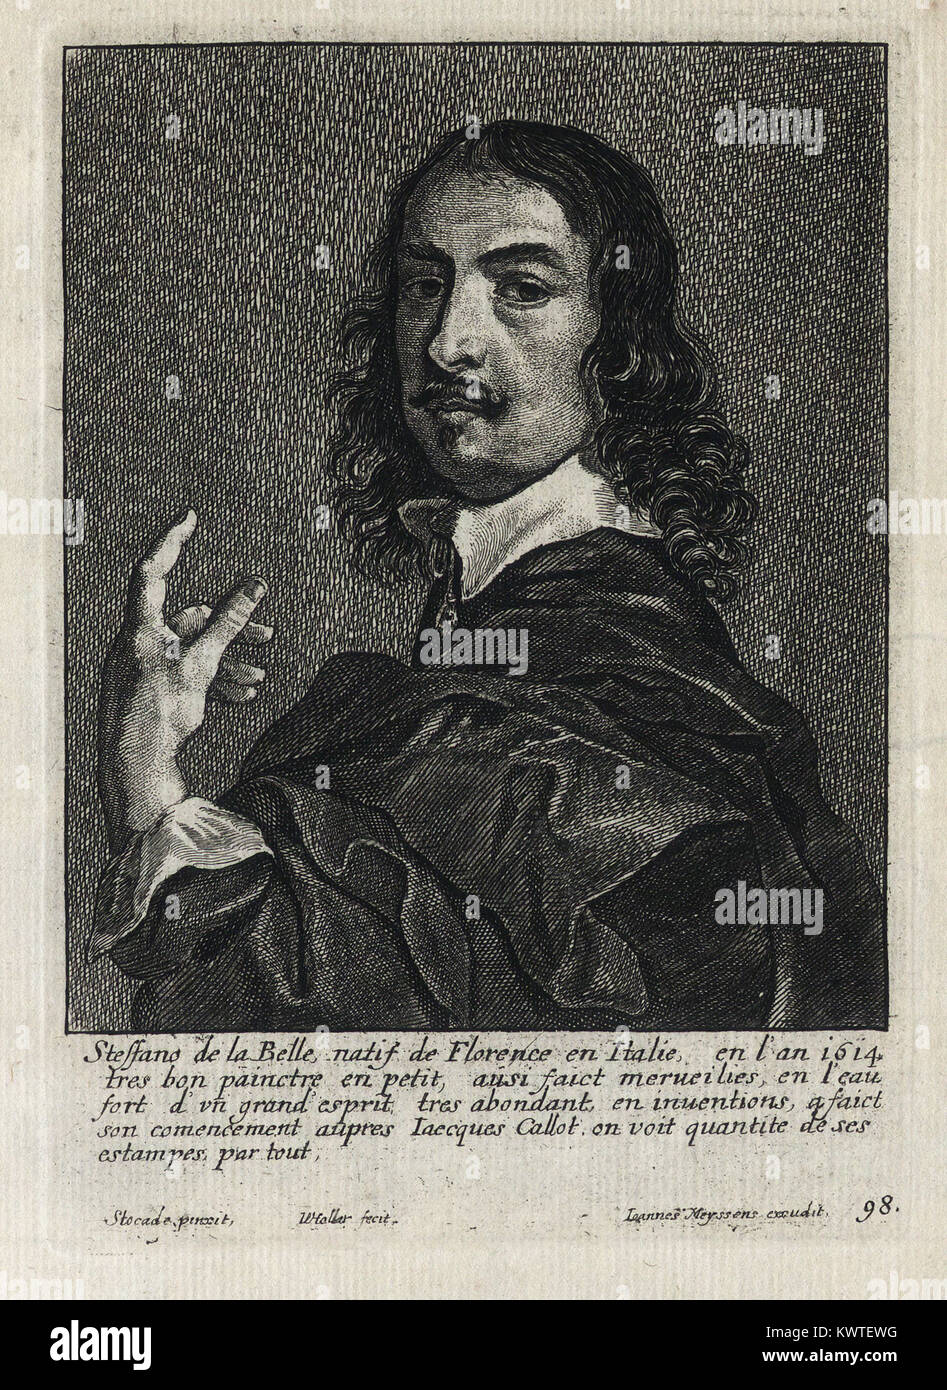 STEFFANO DE LA BELLE - Woodcut portrait and short biography (old french language) - Engraving 17th century Stock Photo